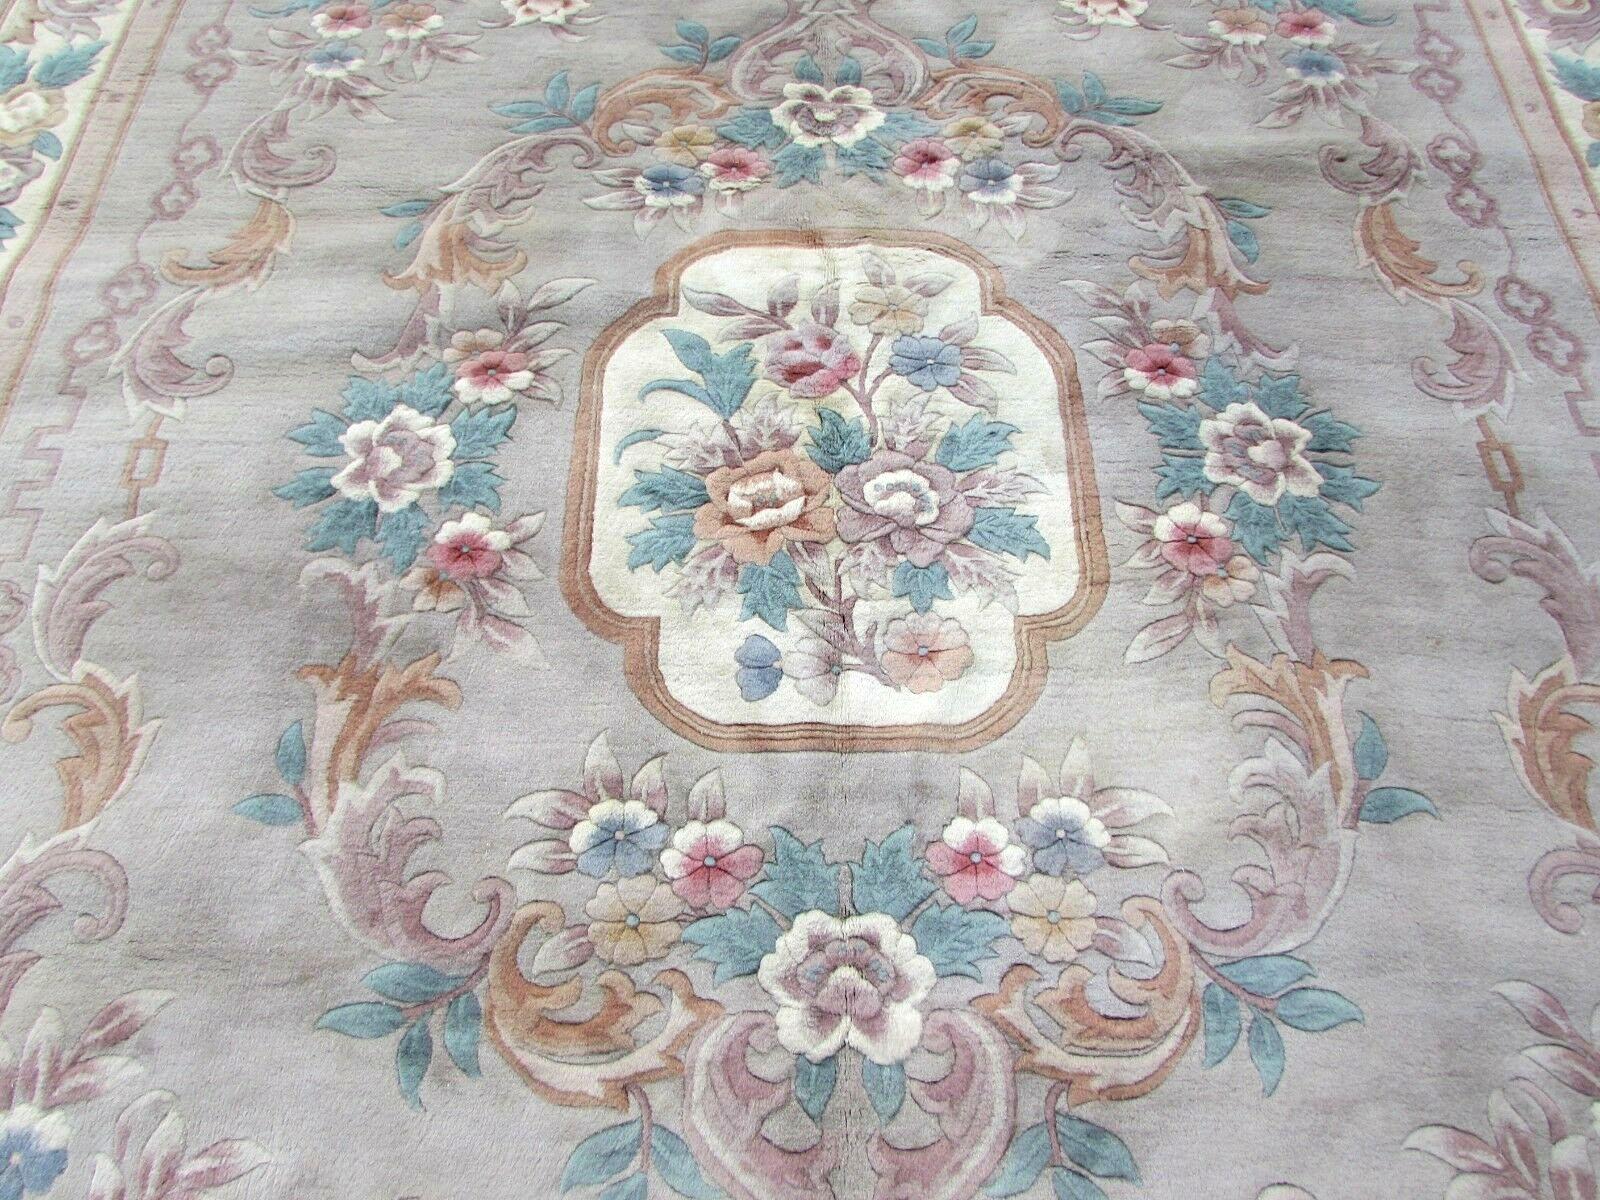 Handmade vintage Chinese rug in French Aubusson style. It is from the end of 20th century in original good condition, it has some age discoloration.

- Condition: Original, age discoloration,

- circa 1970s,

- Size: 9' x 12.3' (270cm x